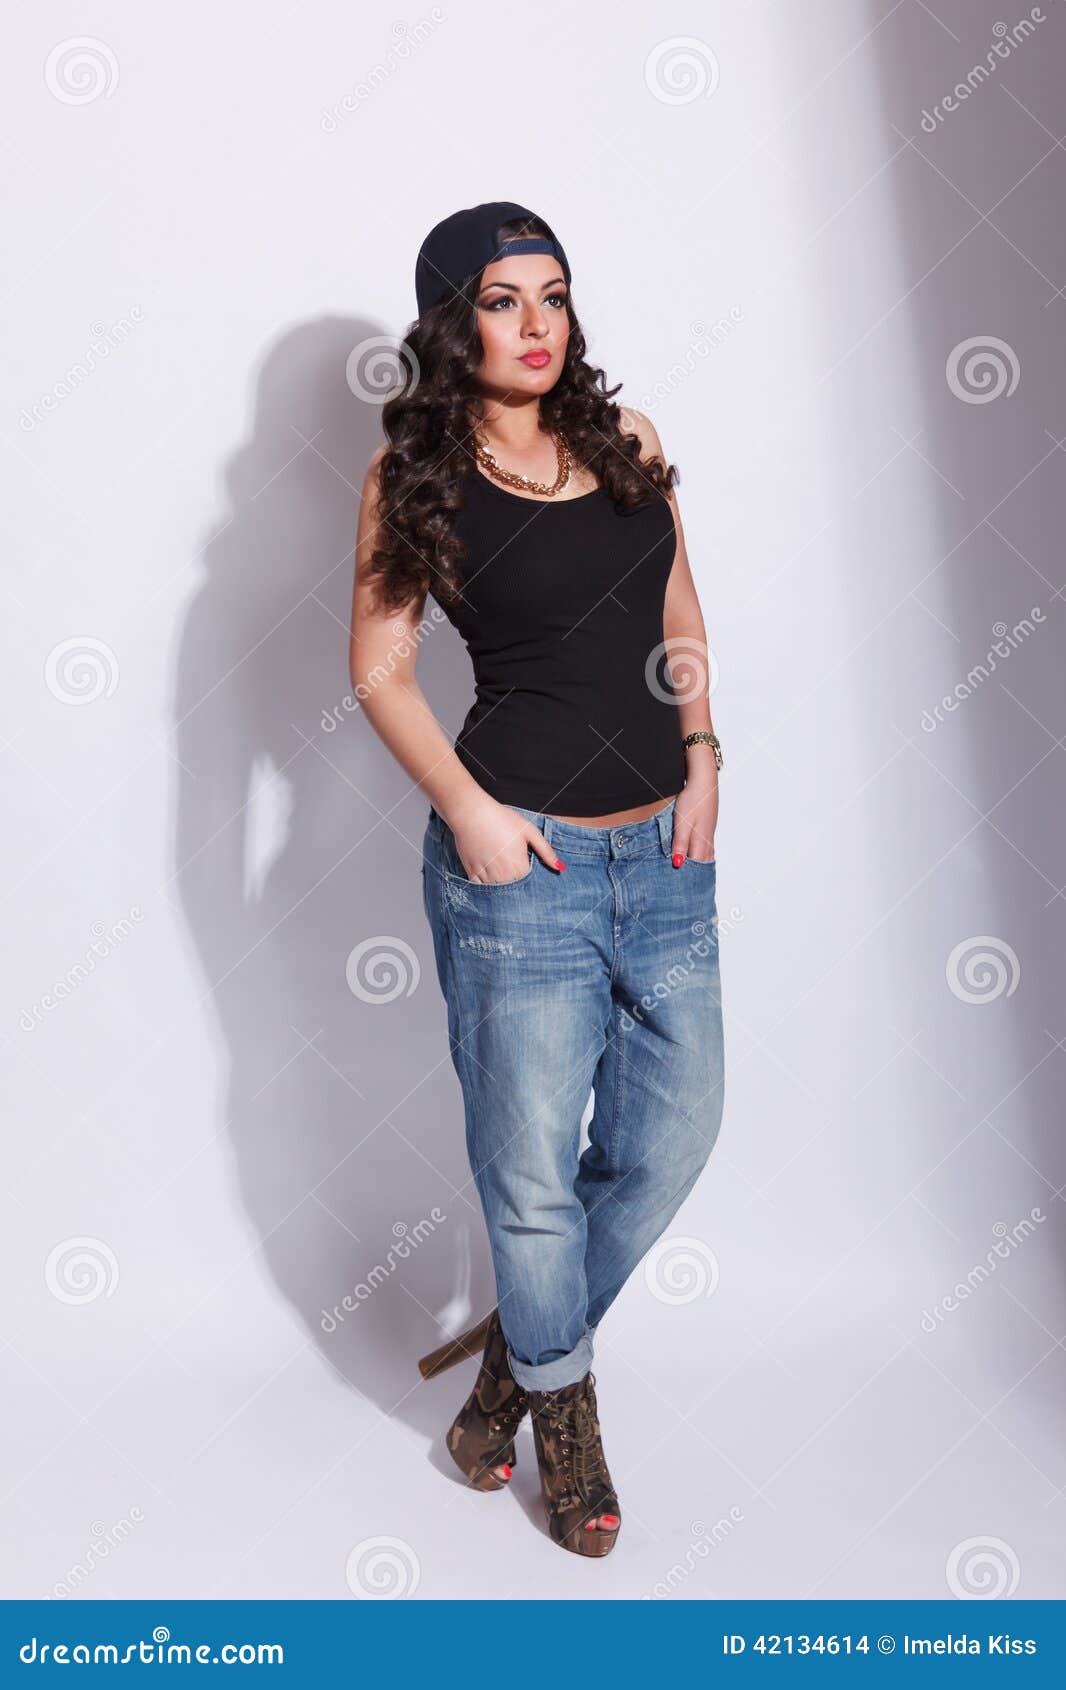 Full Body Portrait of a Beautiful Young Woman Stock Photo - Image of ...